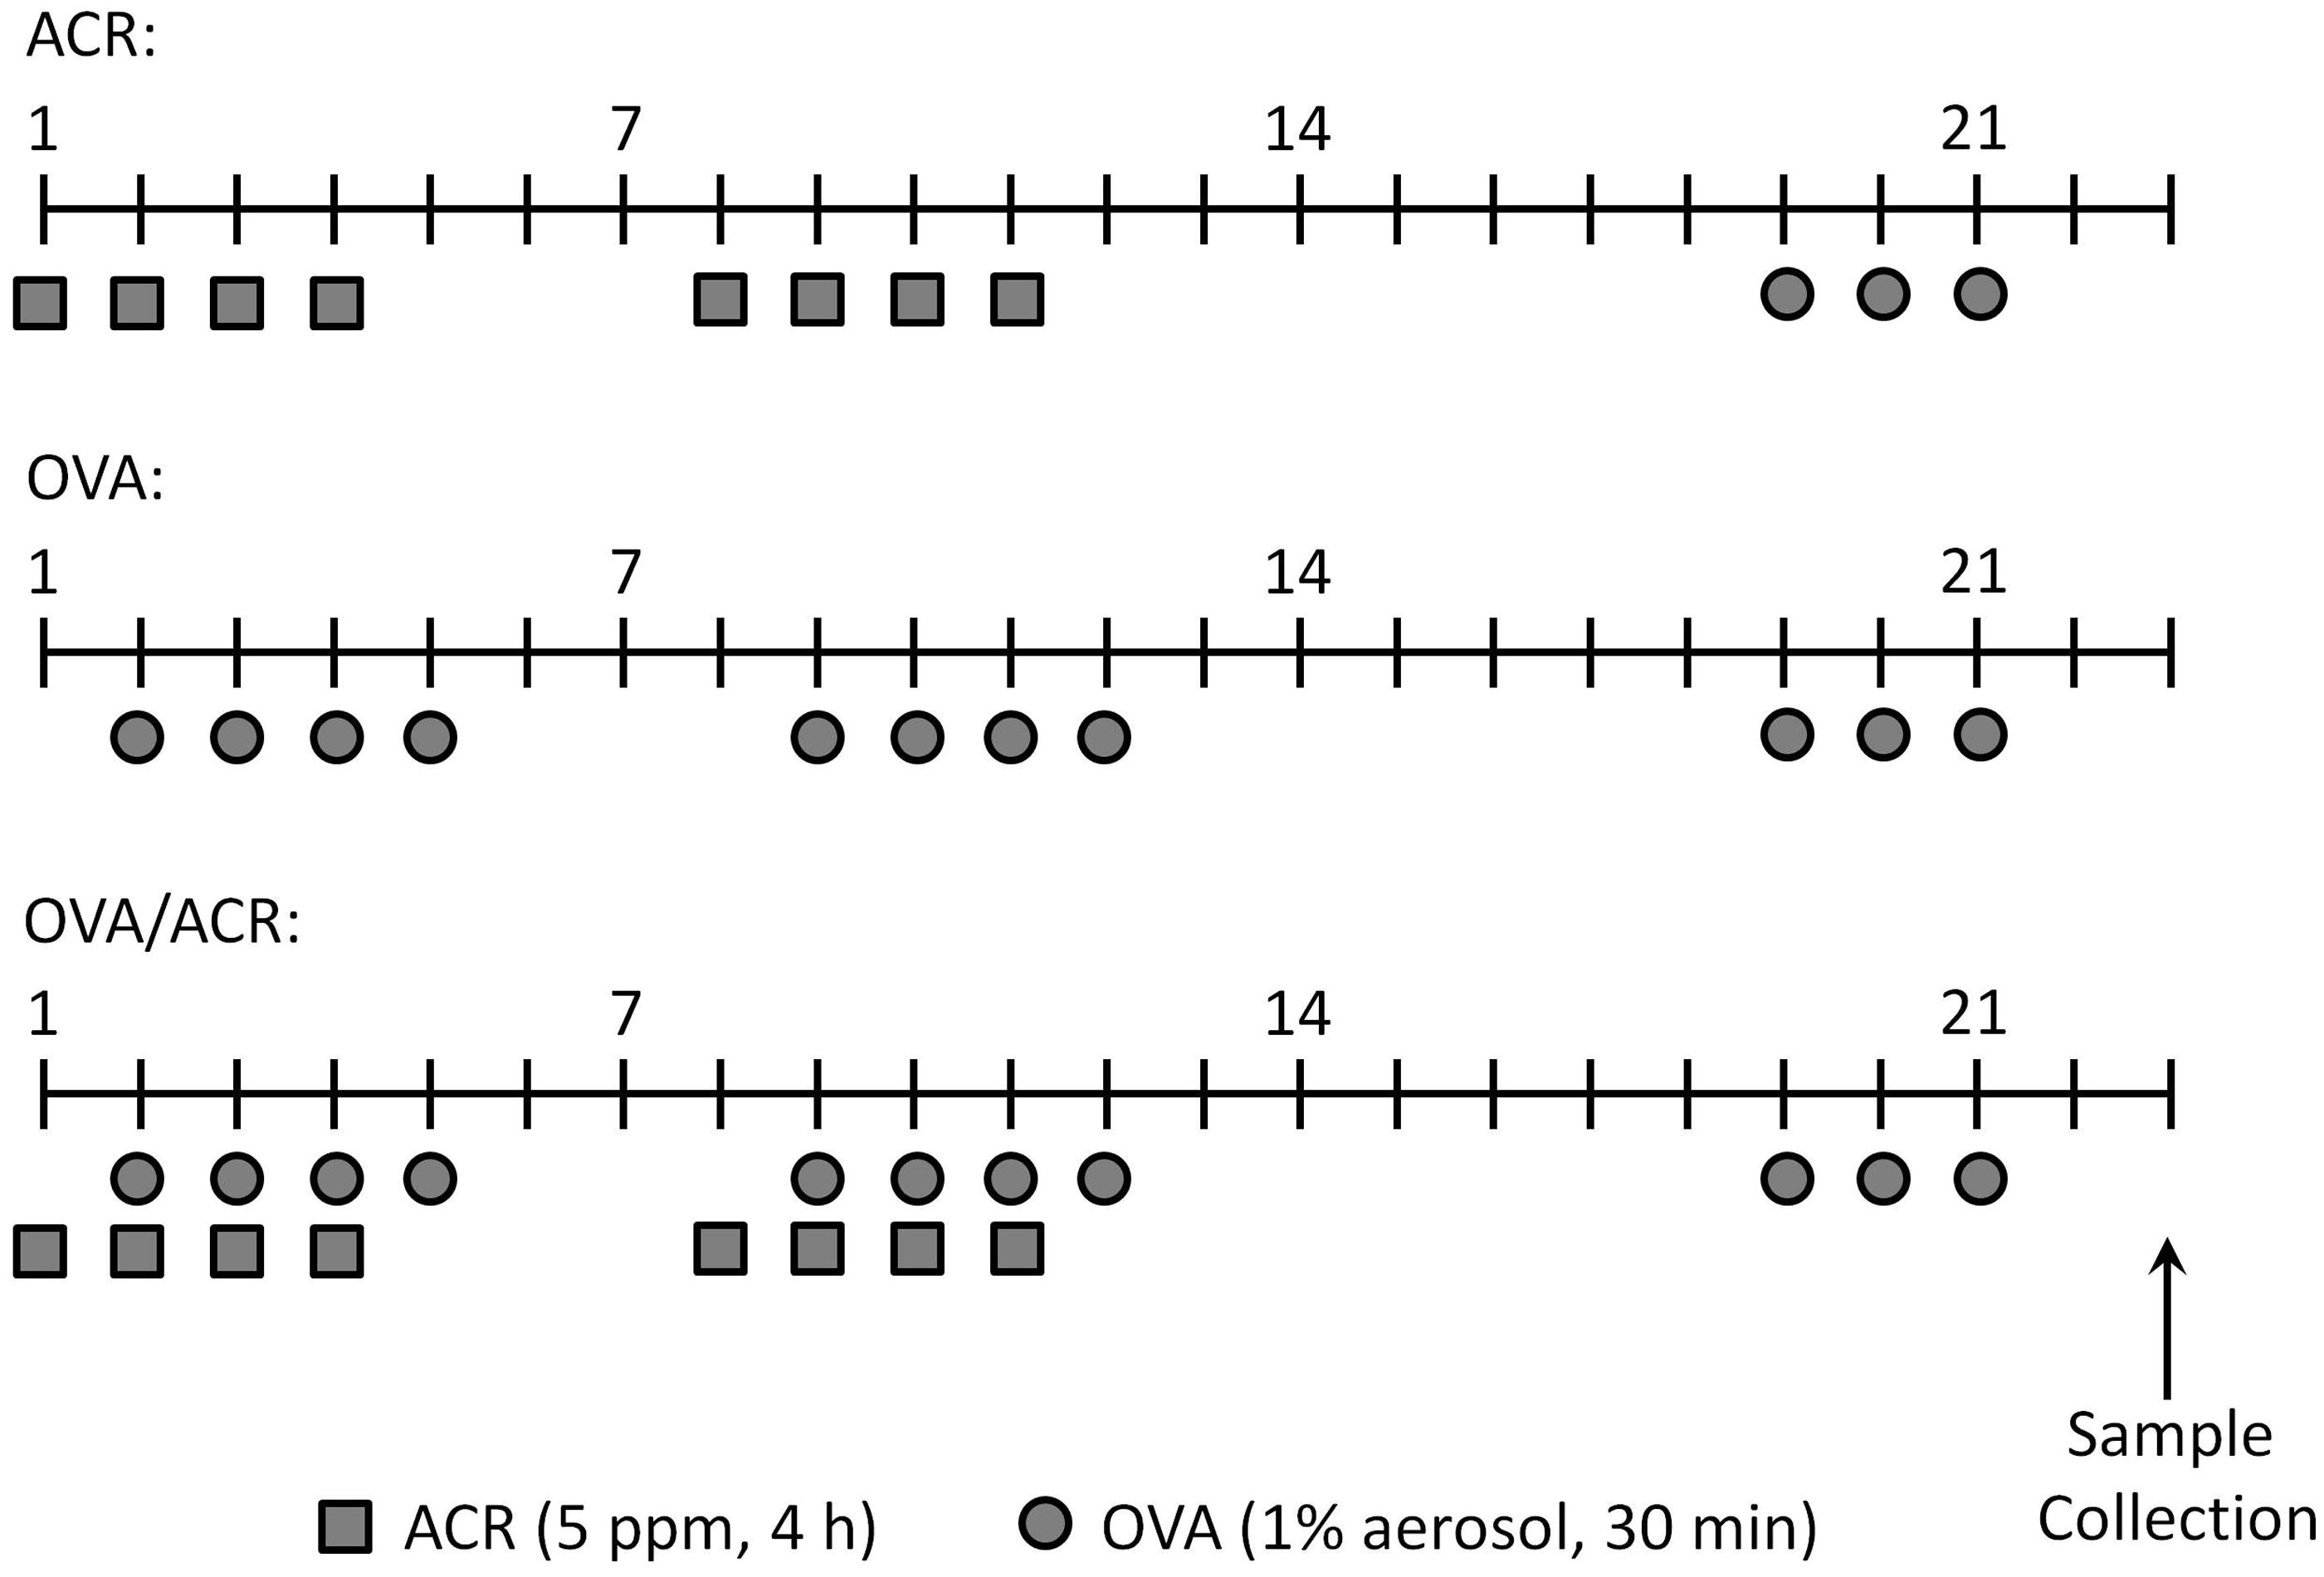 Figure 1. Schematic diagram of ACR and OVA administrations. On indicated days, mice were exposed to 5 ppm ACR for 4 h (squares) and/or 1% OVA in PBS for 30 min (circles). All animals treated with ACR only, OVA only or OVA and ACR were challenged with OVA on Days 19–21. Sample collection occurred on Day 23. Naive mice received no treatment.